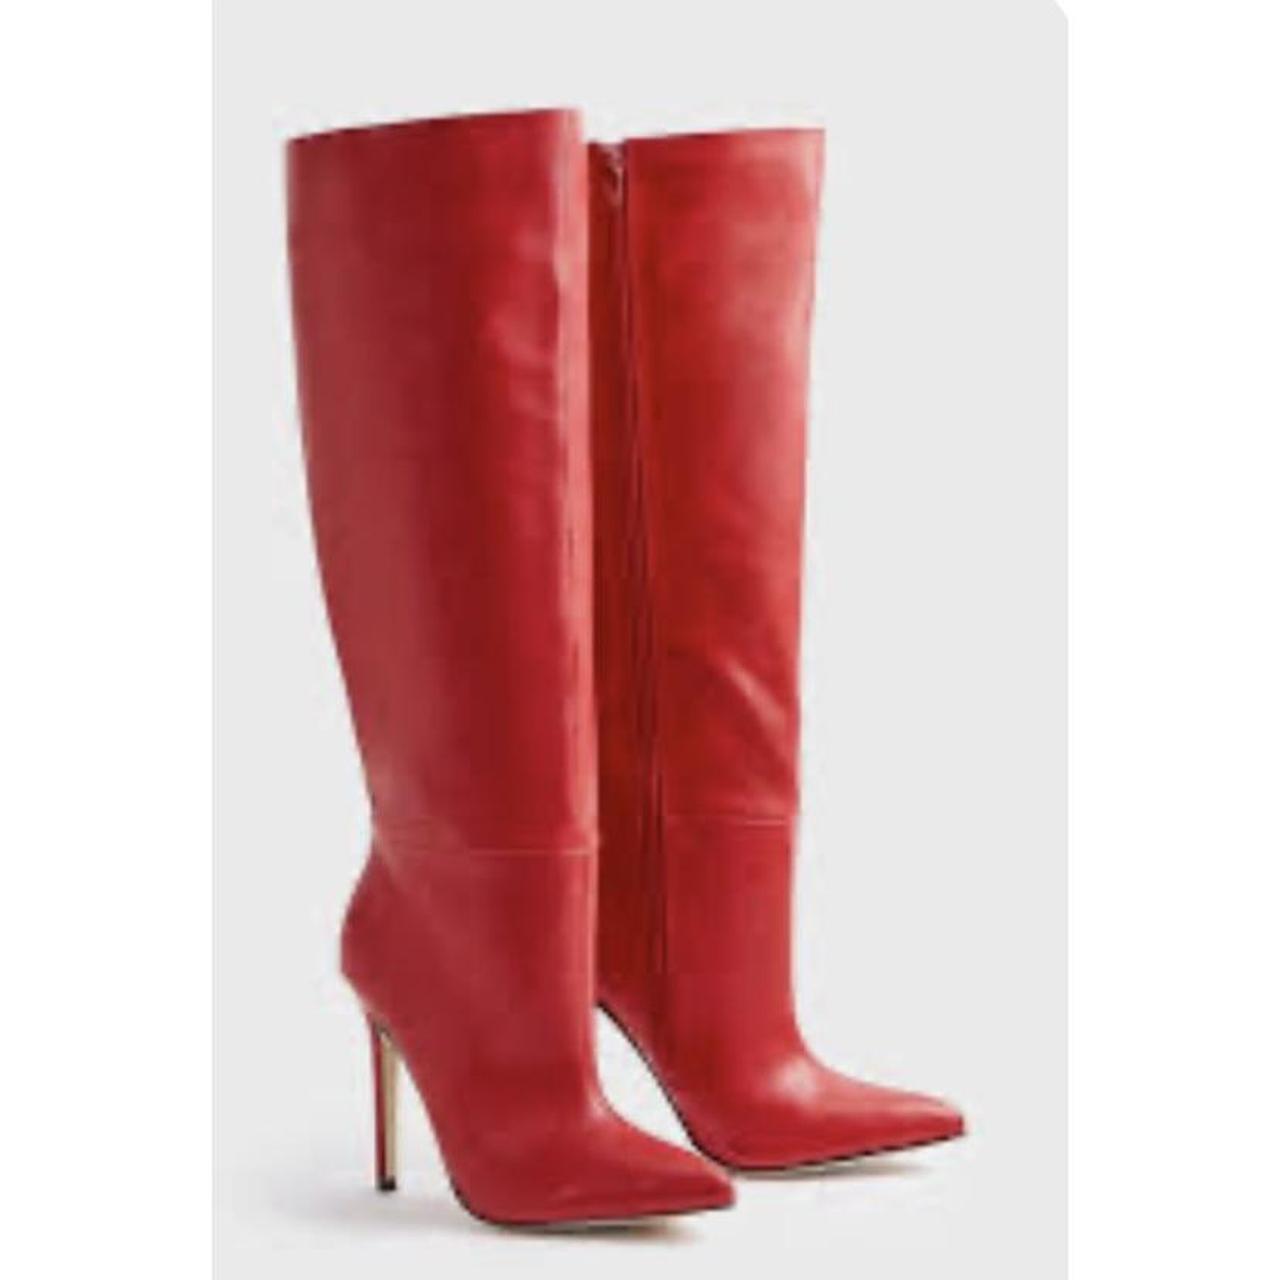 JustFab Women's Red Boots | Depop